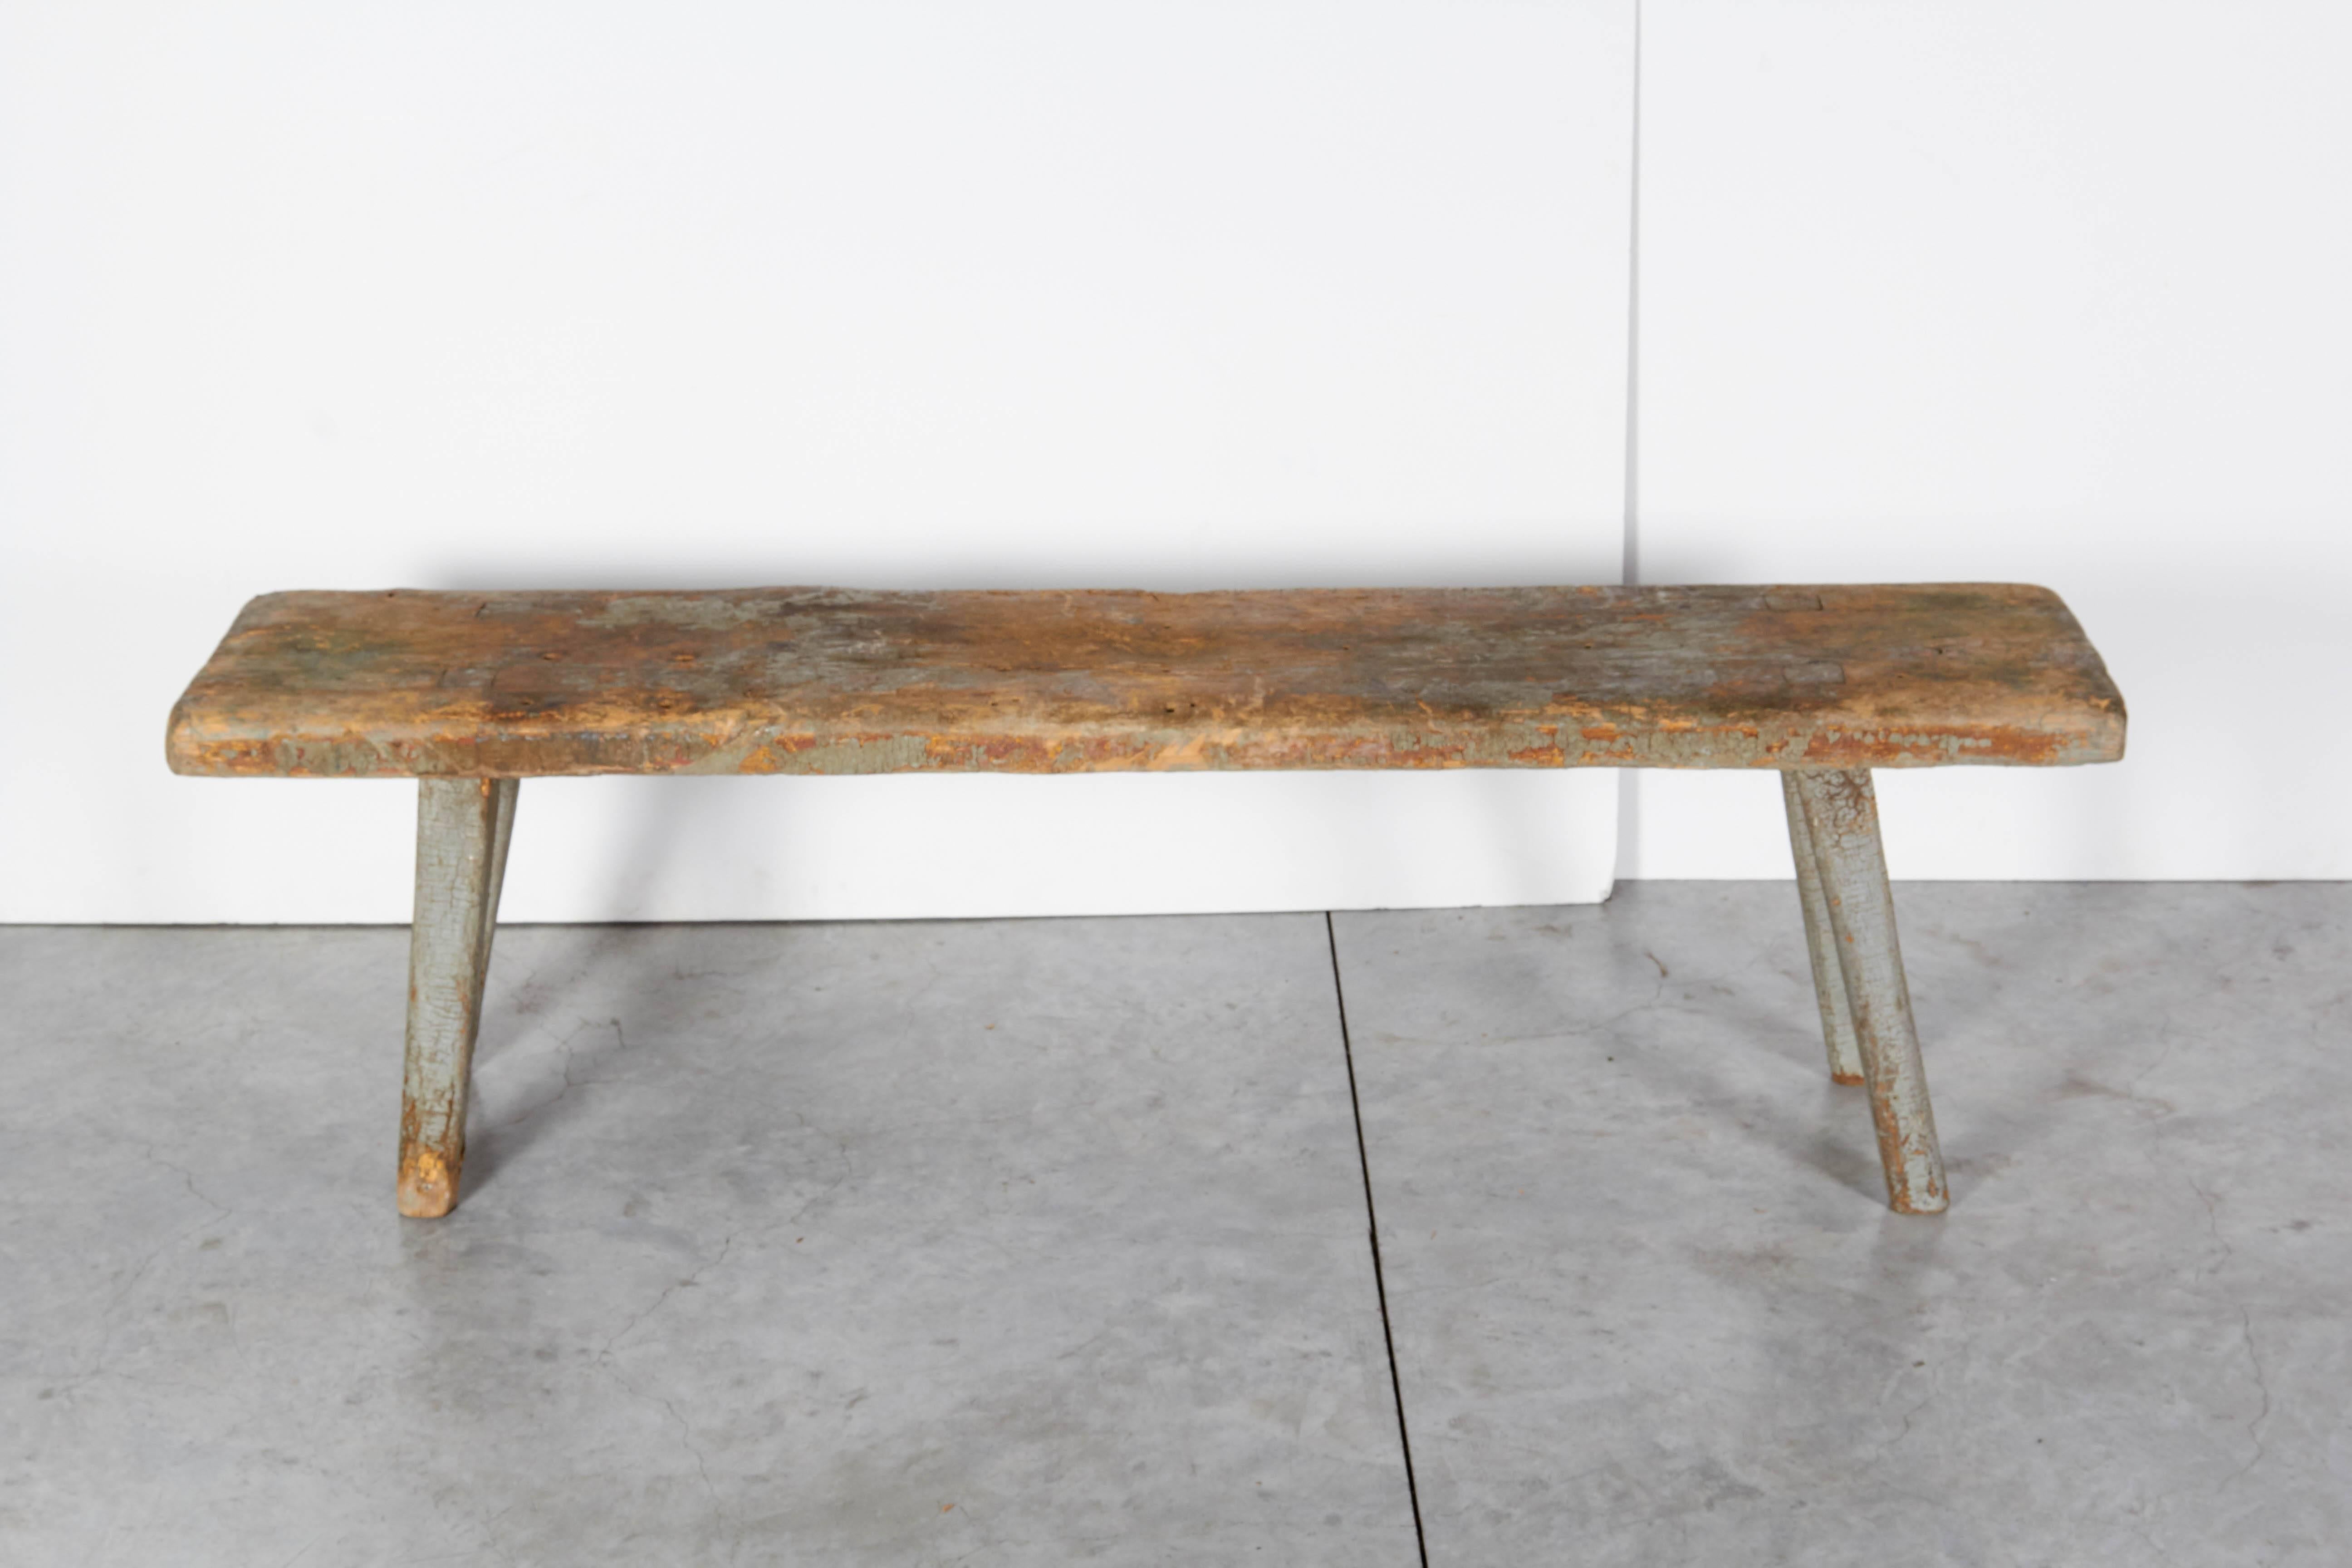 Wood Perfectly Worn New England Bench, Great Patina, Old Paint